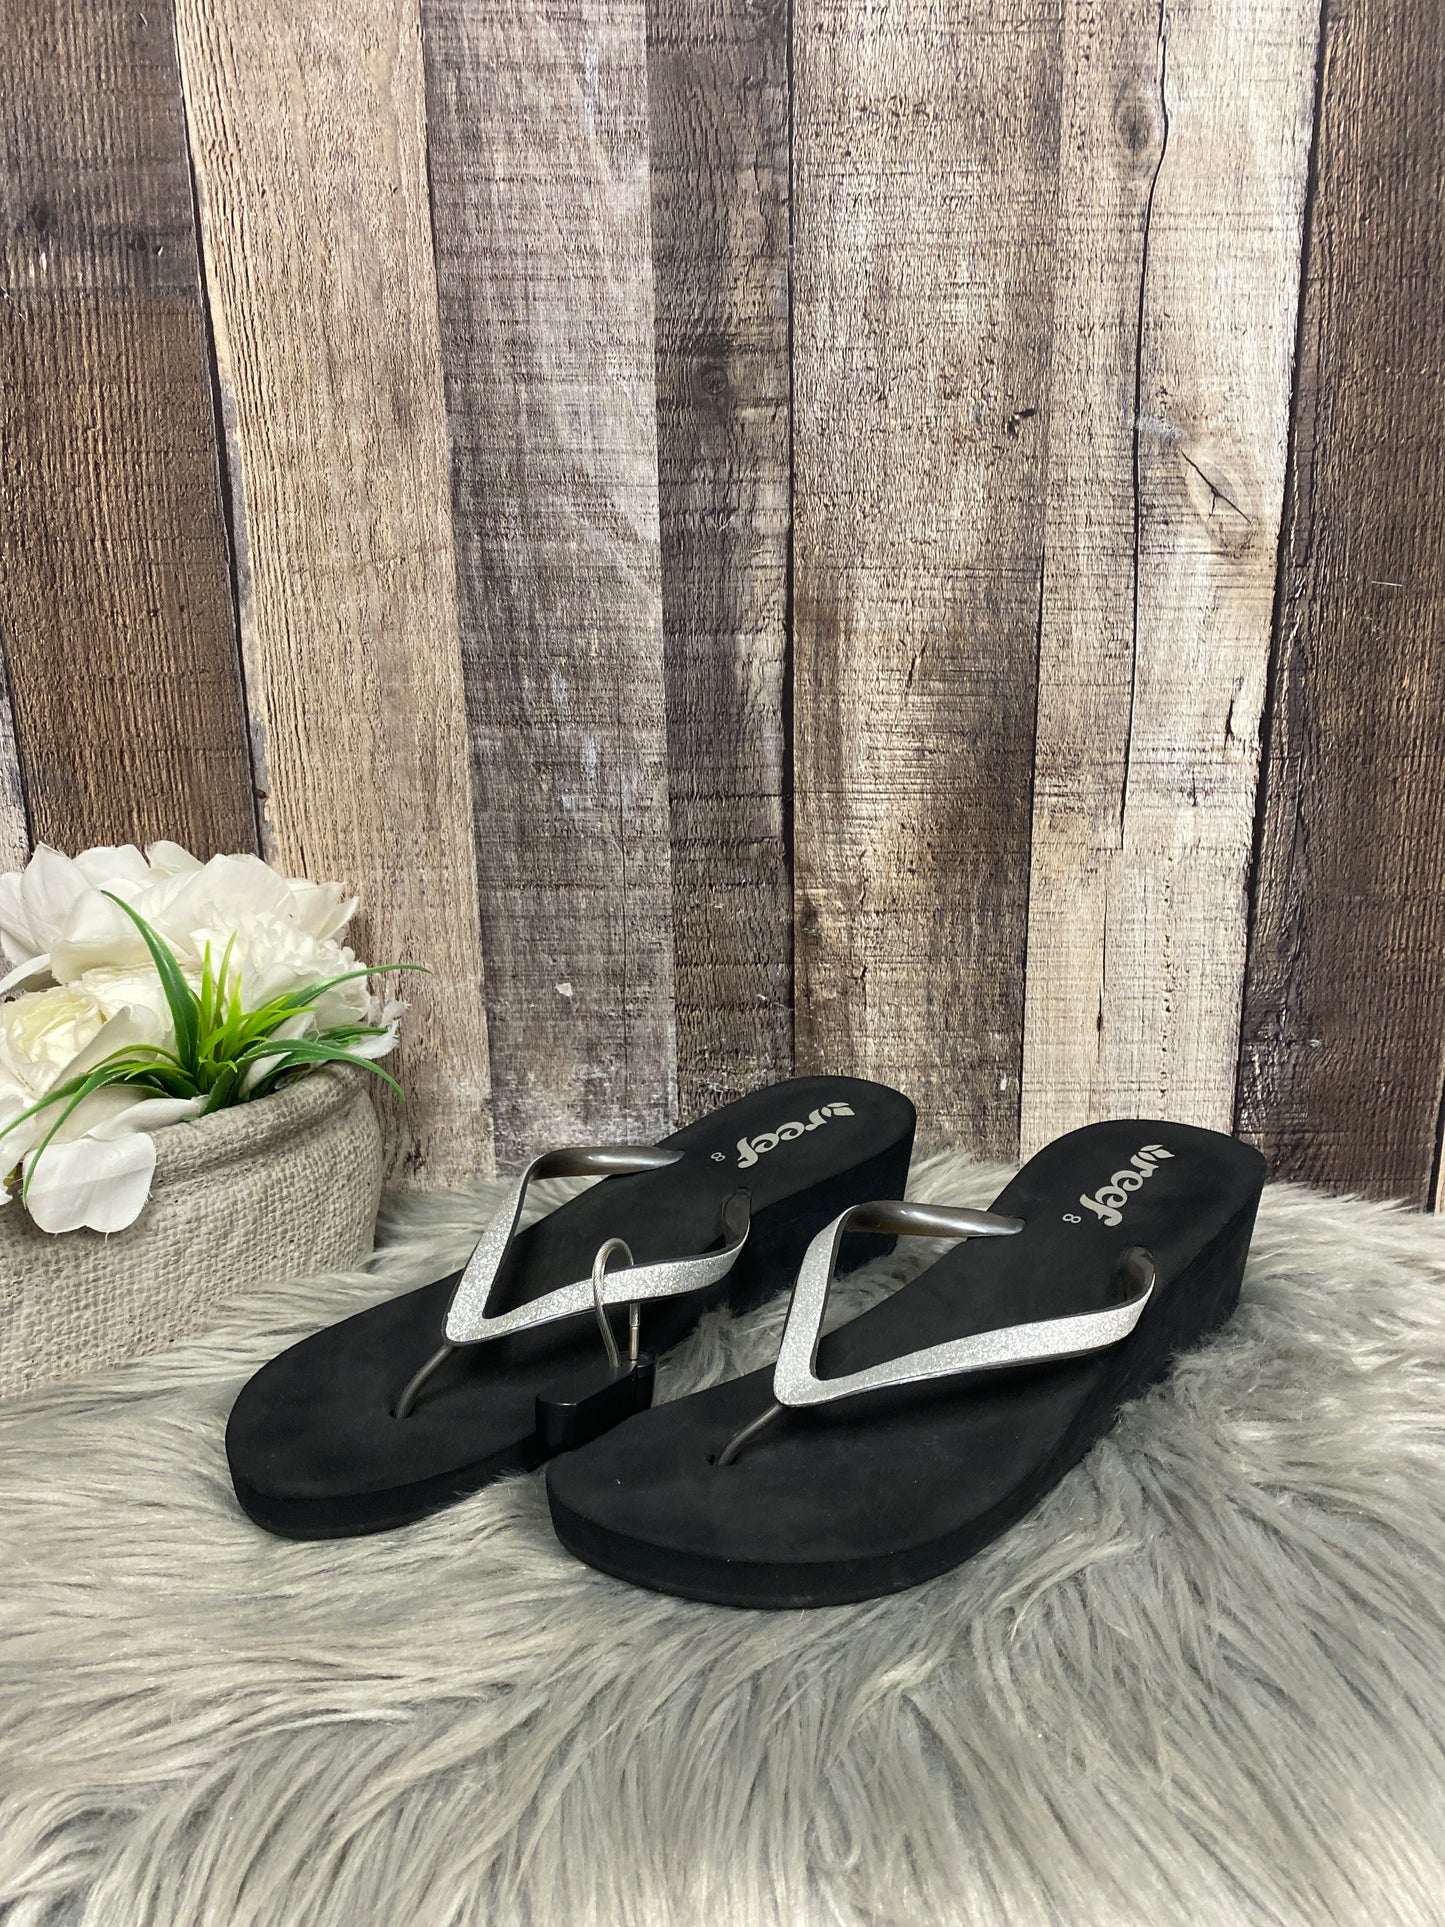 Sandals Flats By Reef  Size: 9